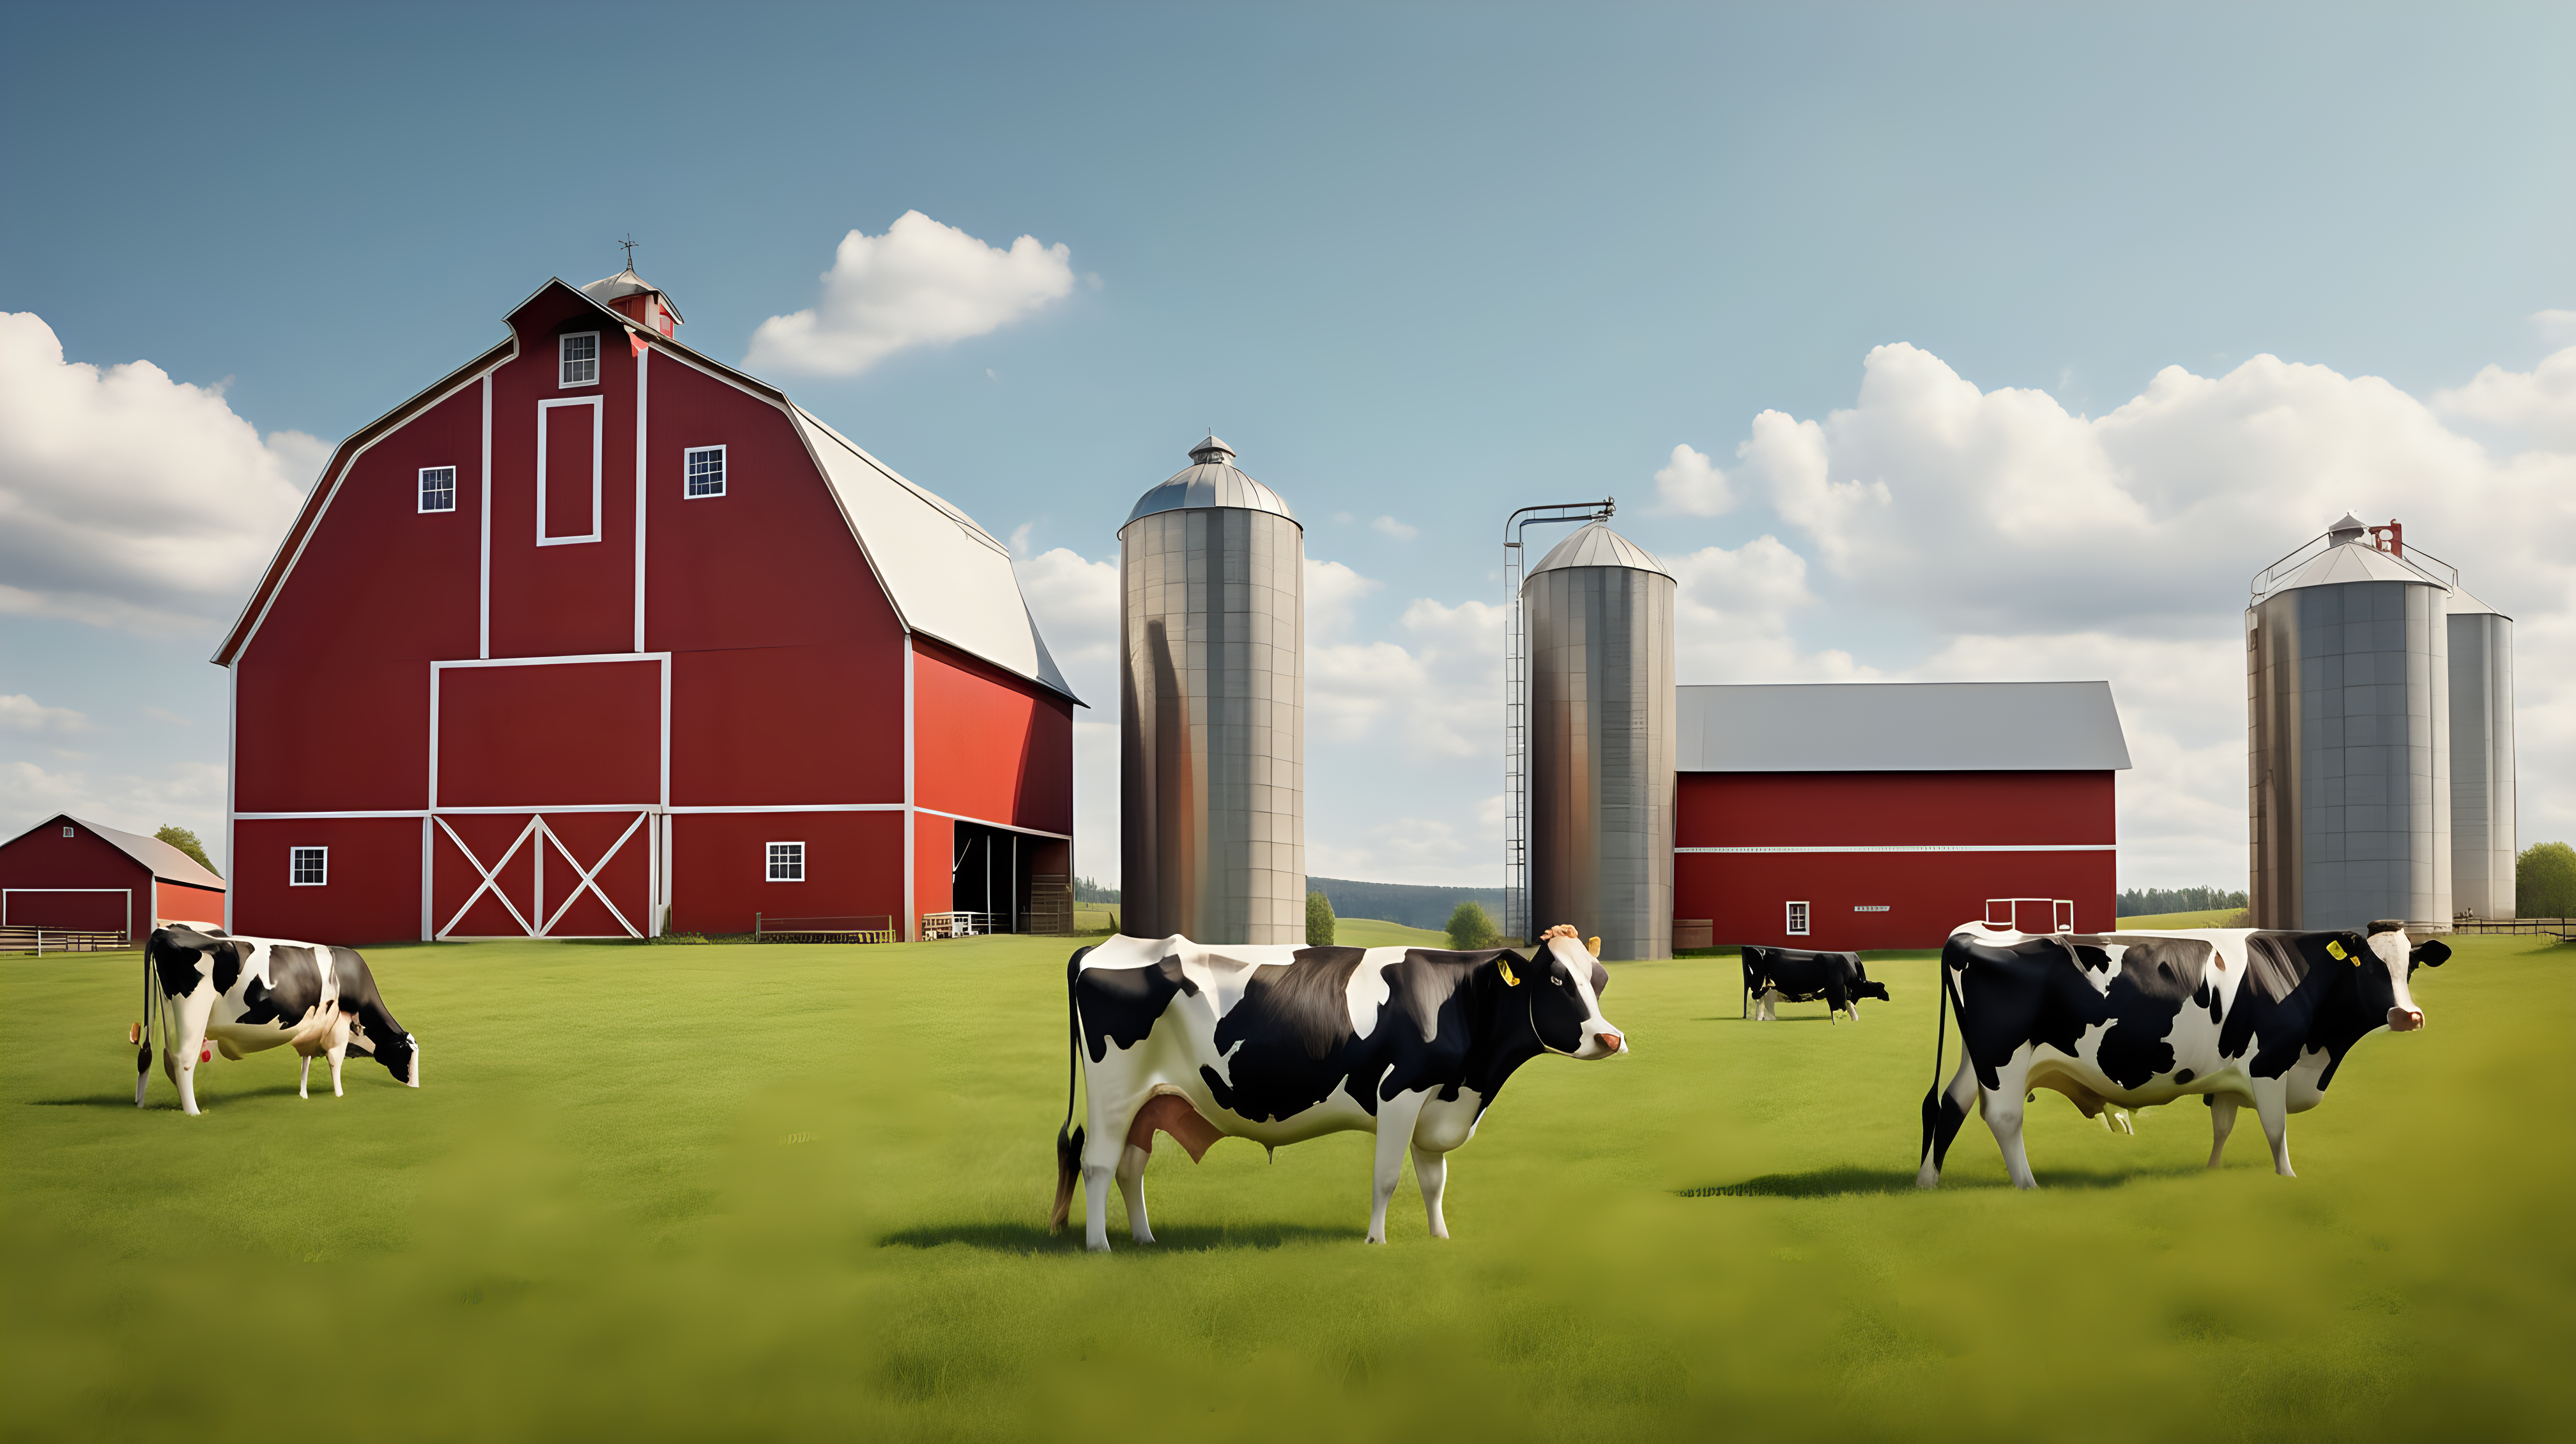 Cows grazing in a grassy farm pasture with red barn and silo. realistic photo